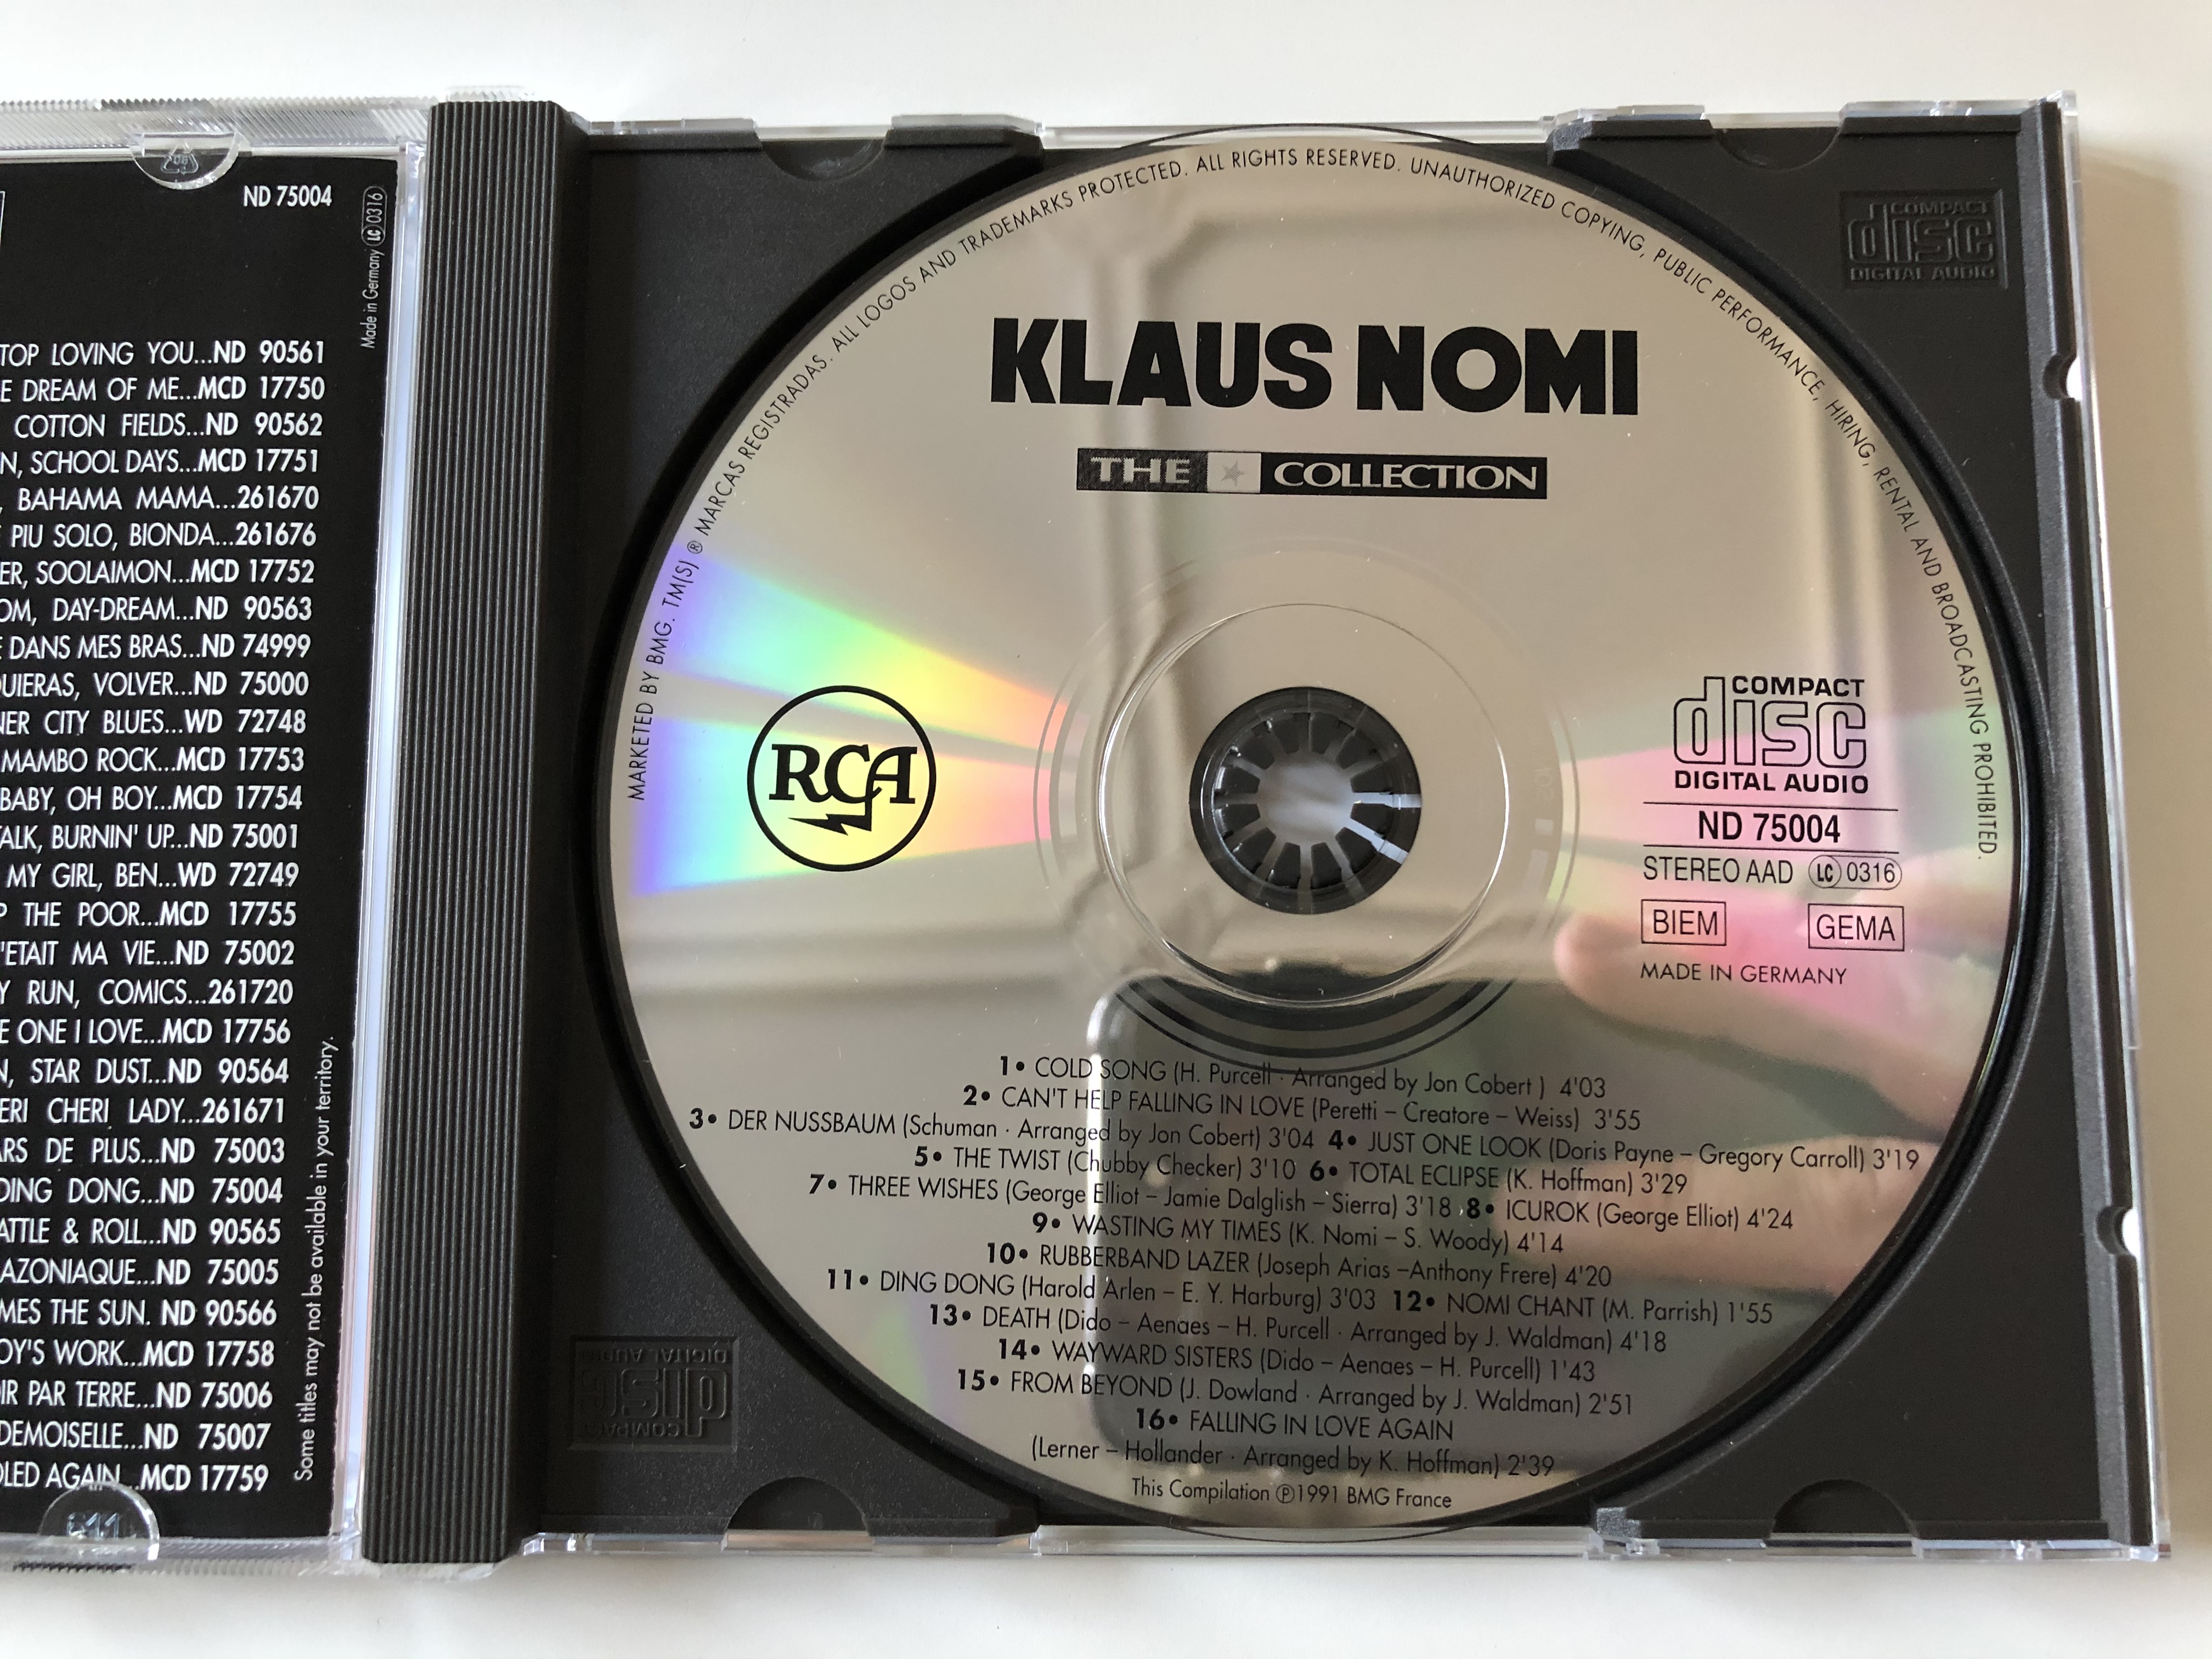 klaus-nomi-the-collection-cold-song-can-t-help-falling-in-love-ding-dong-bmg-audio-cd-1991-stereo-nd75004-4-.jpg